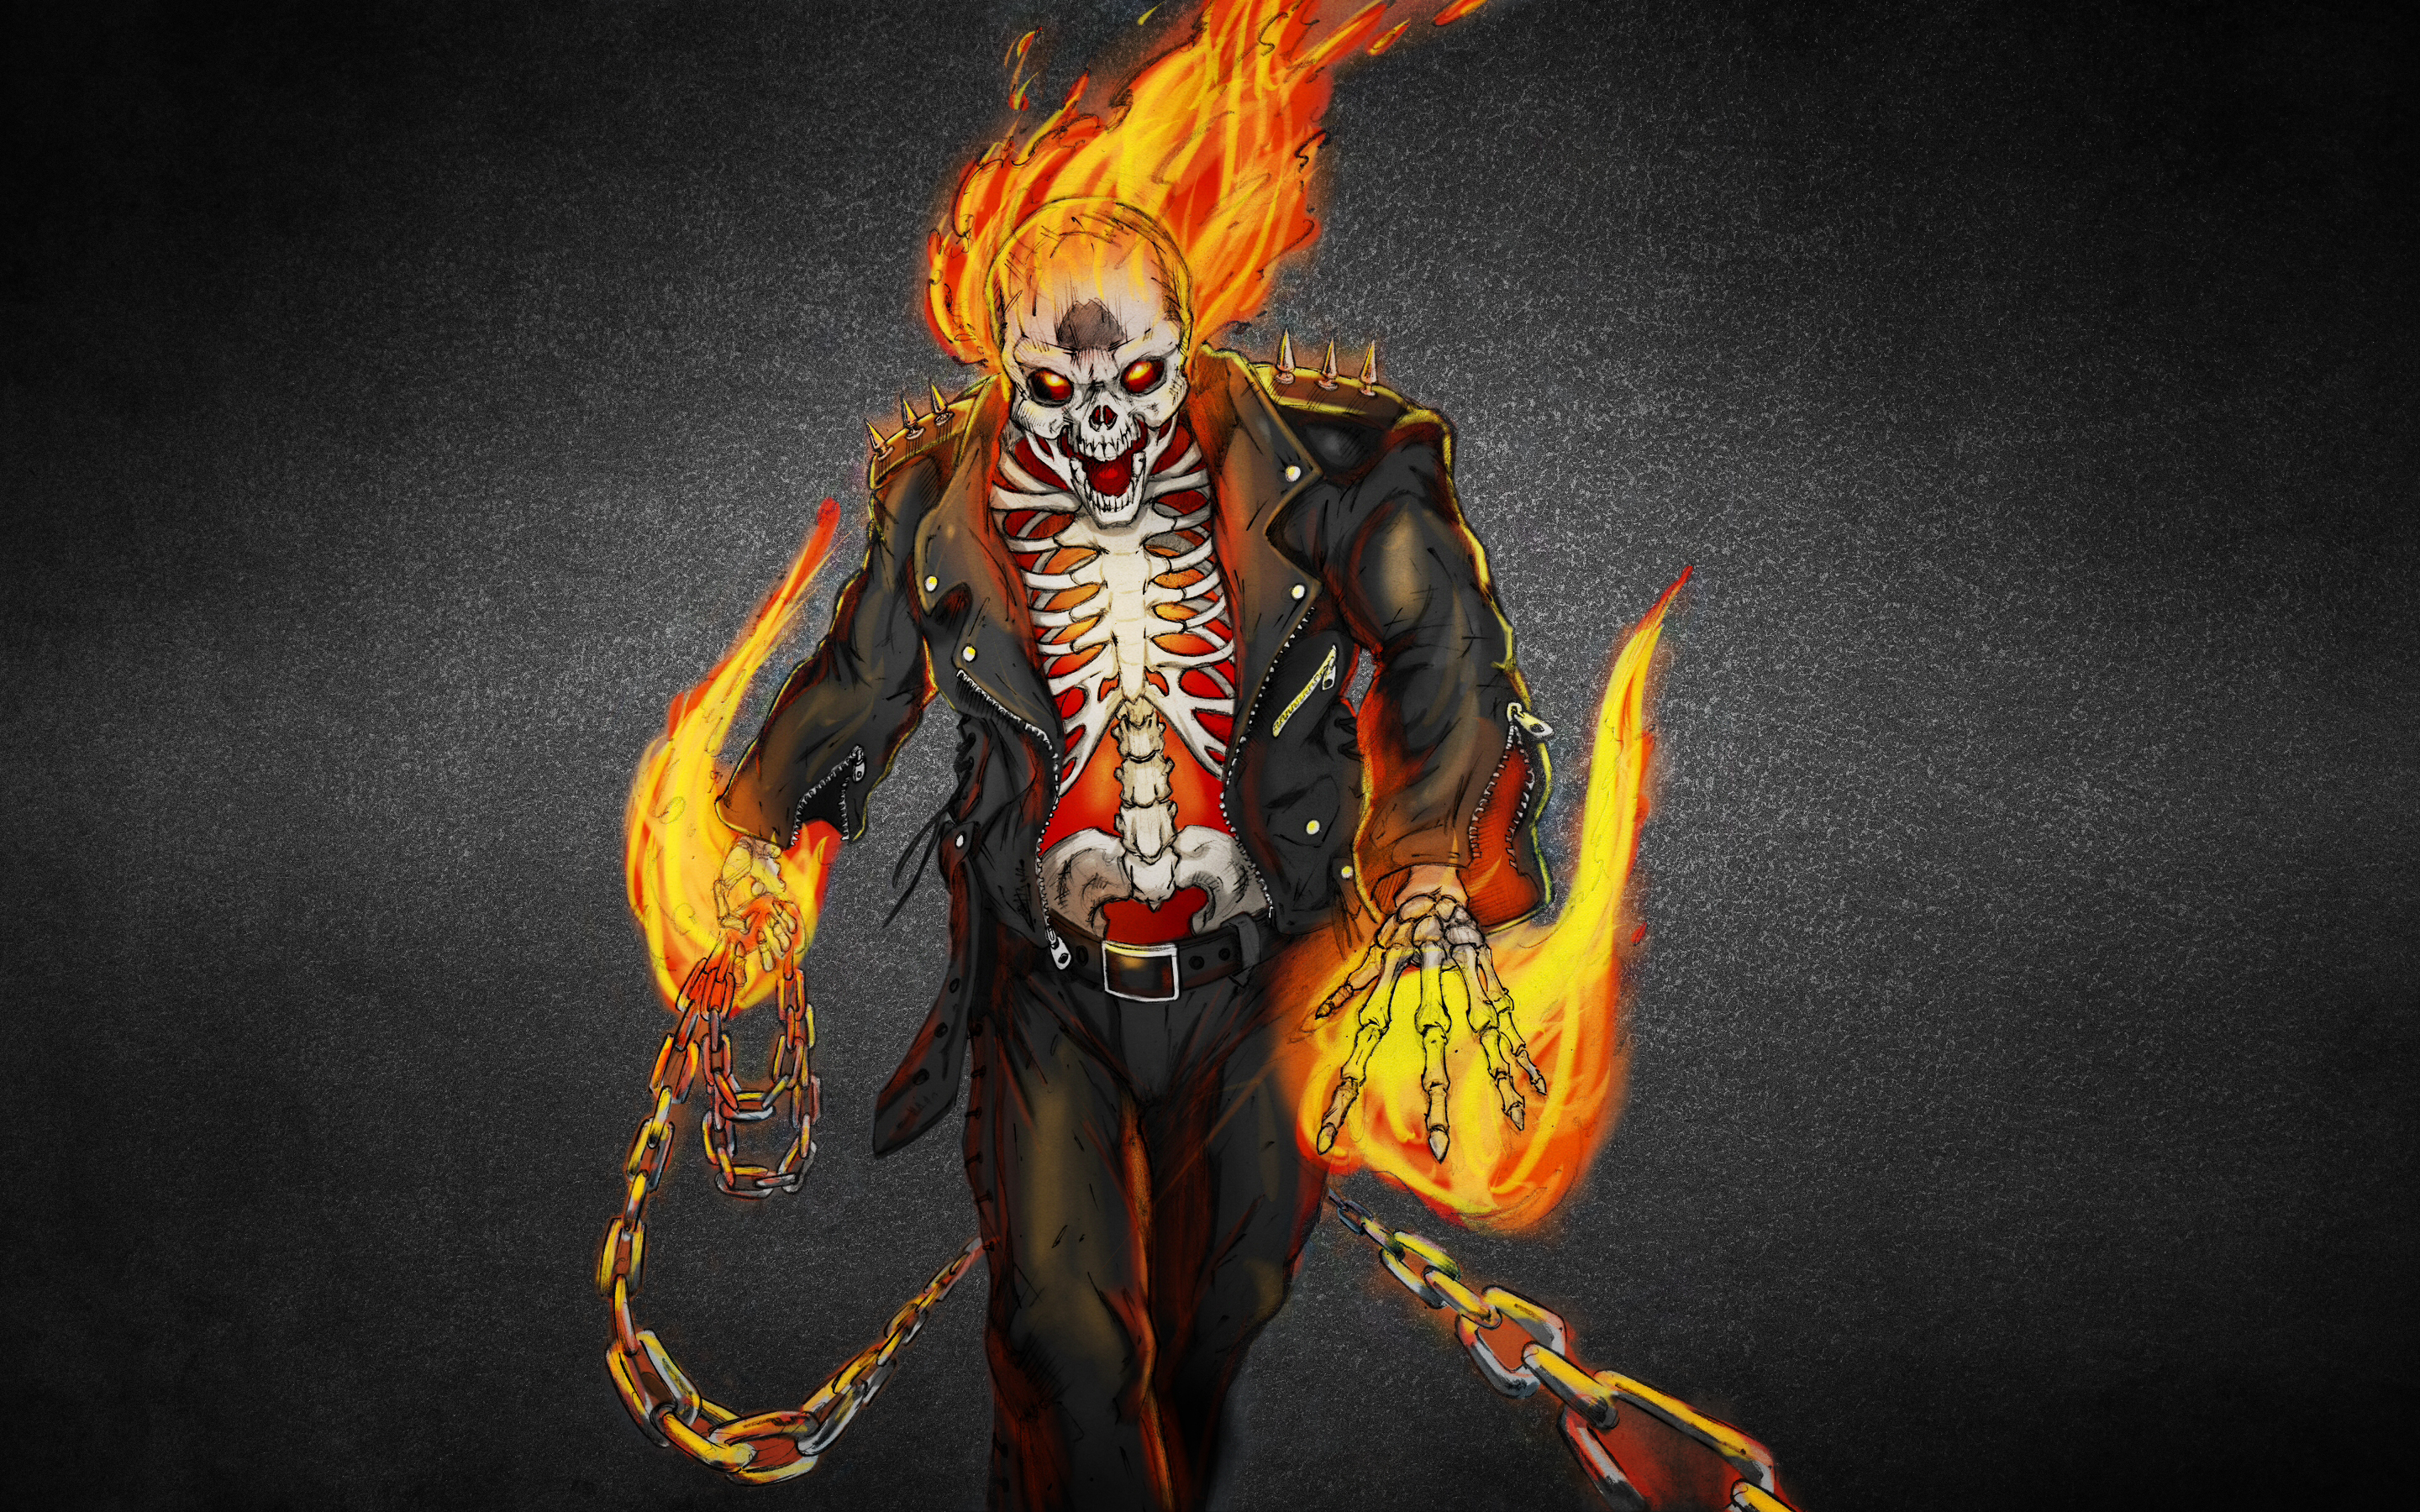 New Lock Screen Wallpapers comics, ghost rider, chain, fire, leather, painting, skeleton, skull